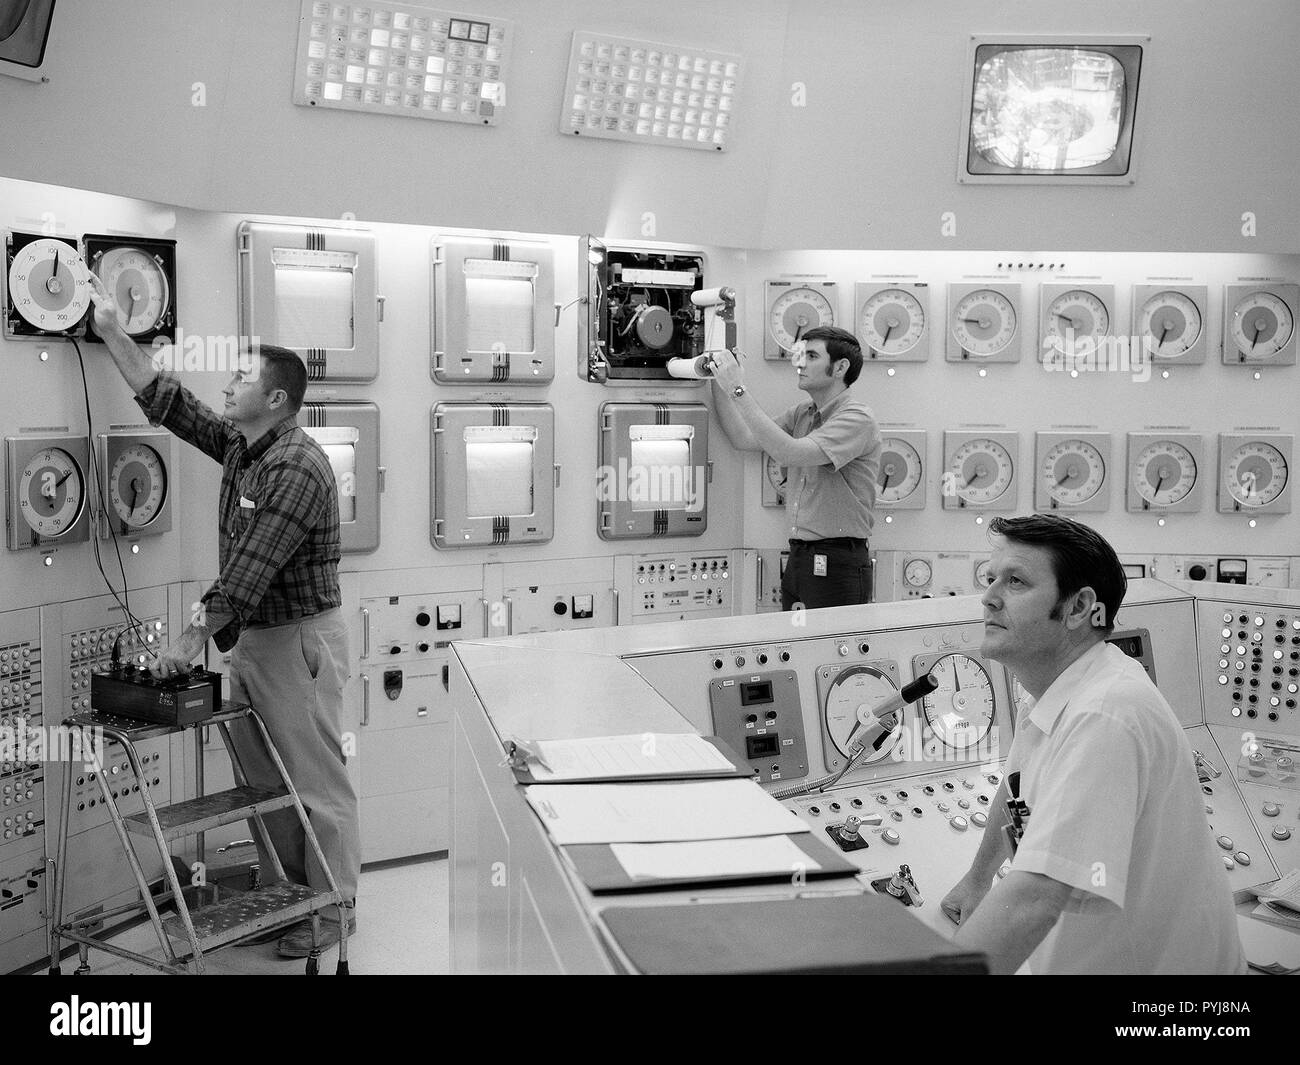 Donald Rhodes, left, and Clyde Greer, right, monitor the operation of the National Aeronautics and Space Administration’s (NASA) Plum Brook Reactor Facility from the control room. Stock Photo